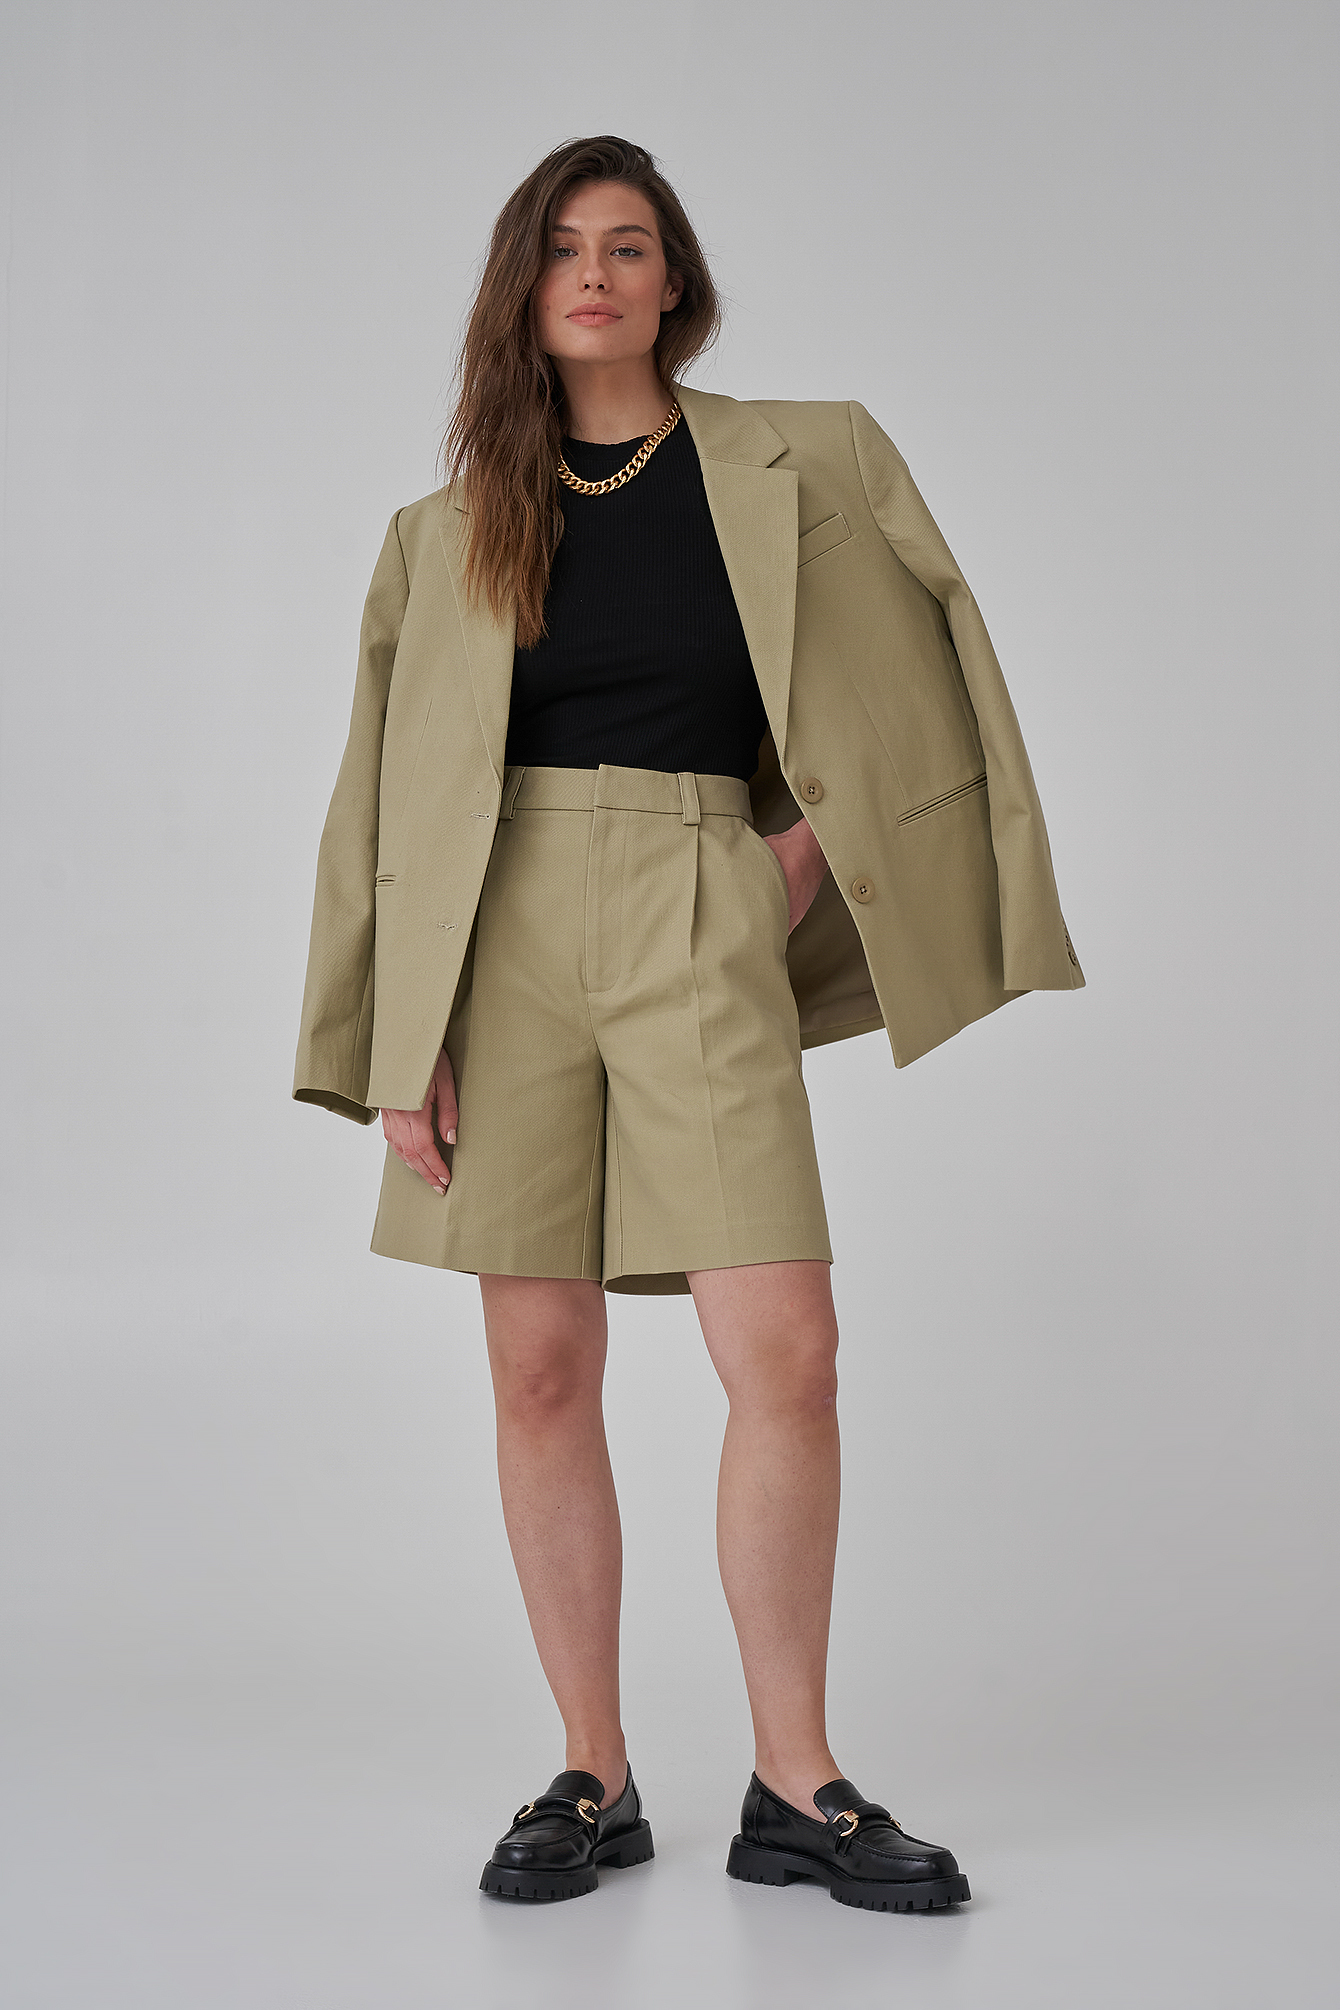 Front Pleat Twill Long Short Outfit.